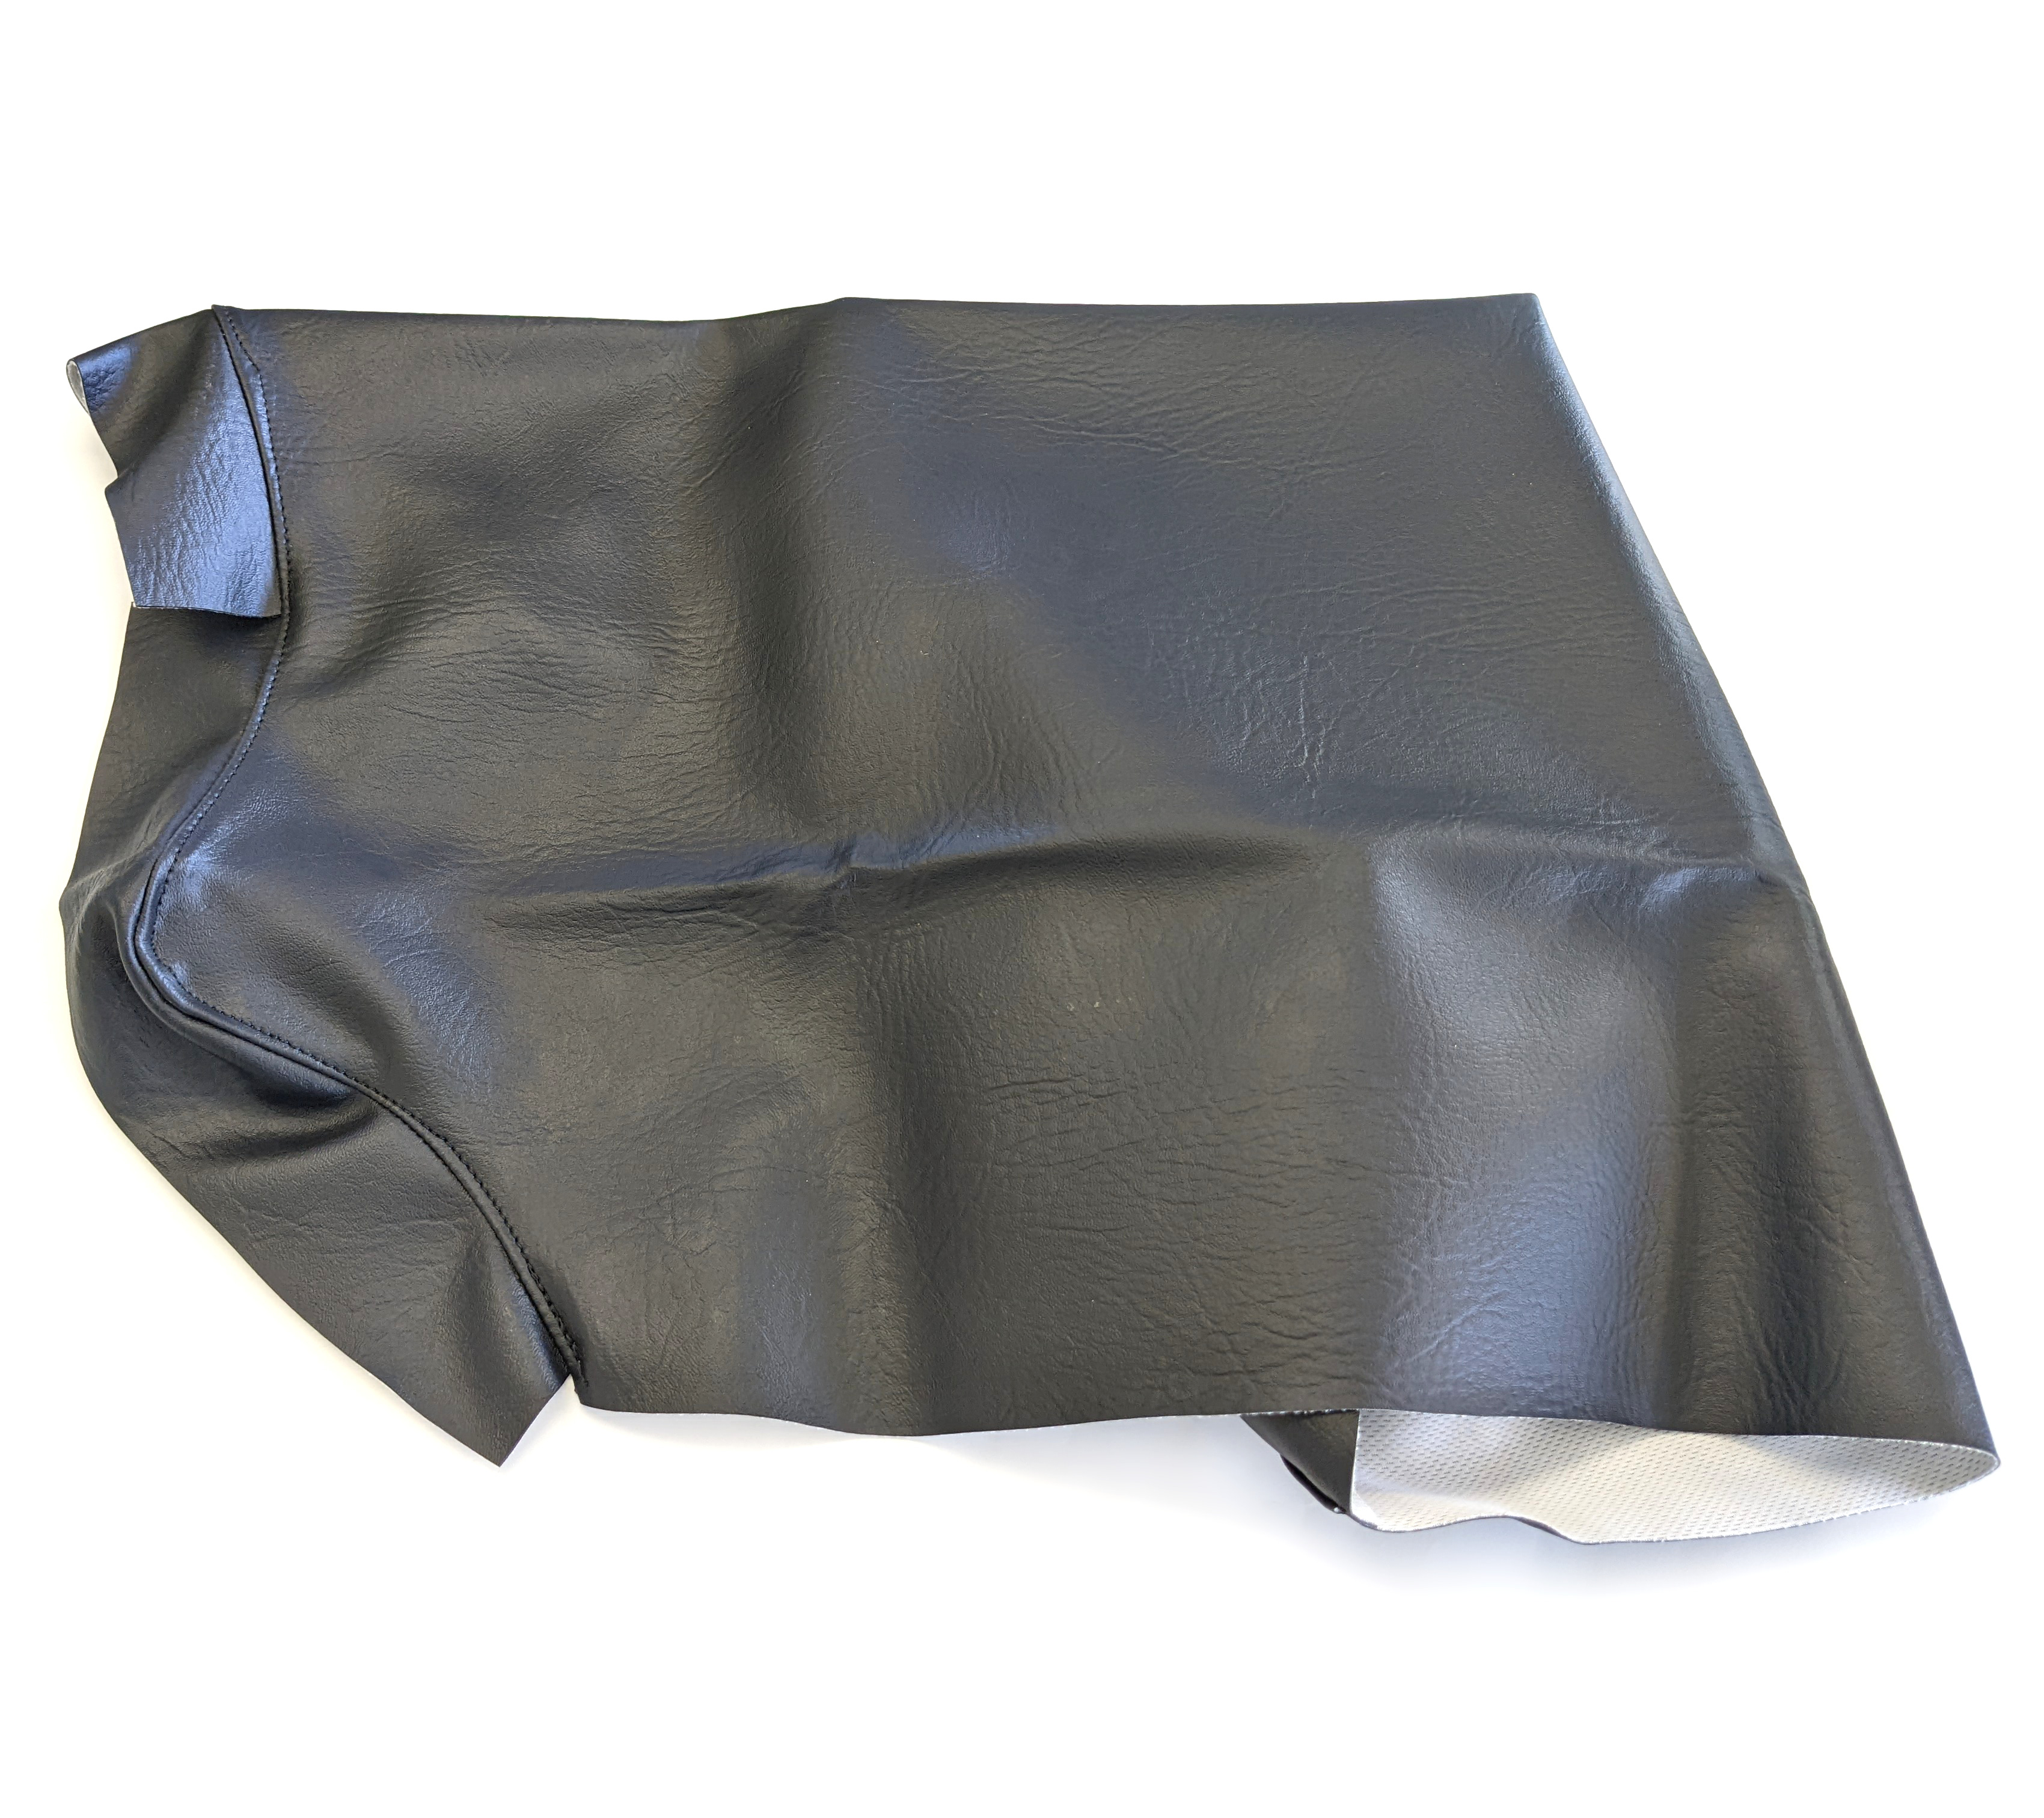 Black Seat Cover ONLY - 05-13 Suzuki King Quad - Click Image to Close